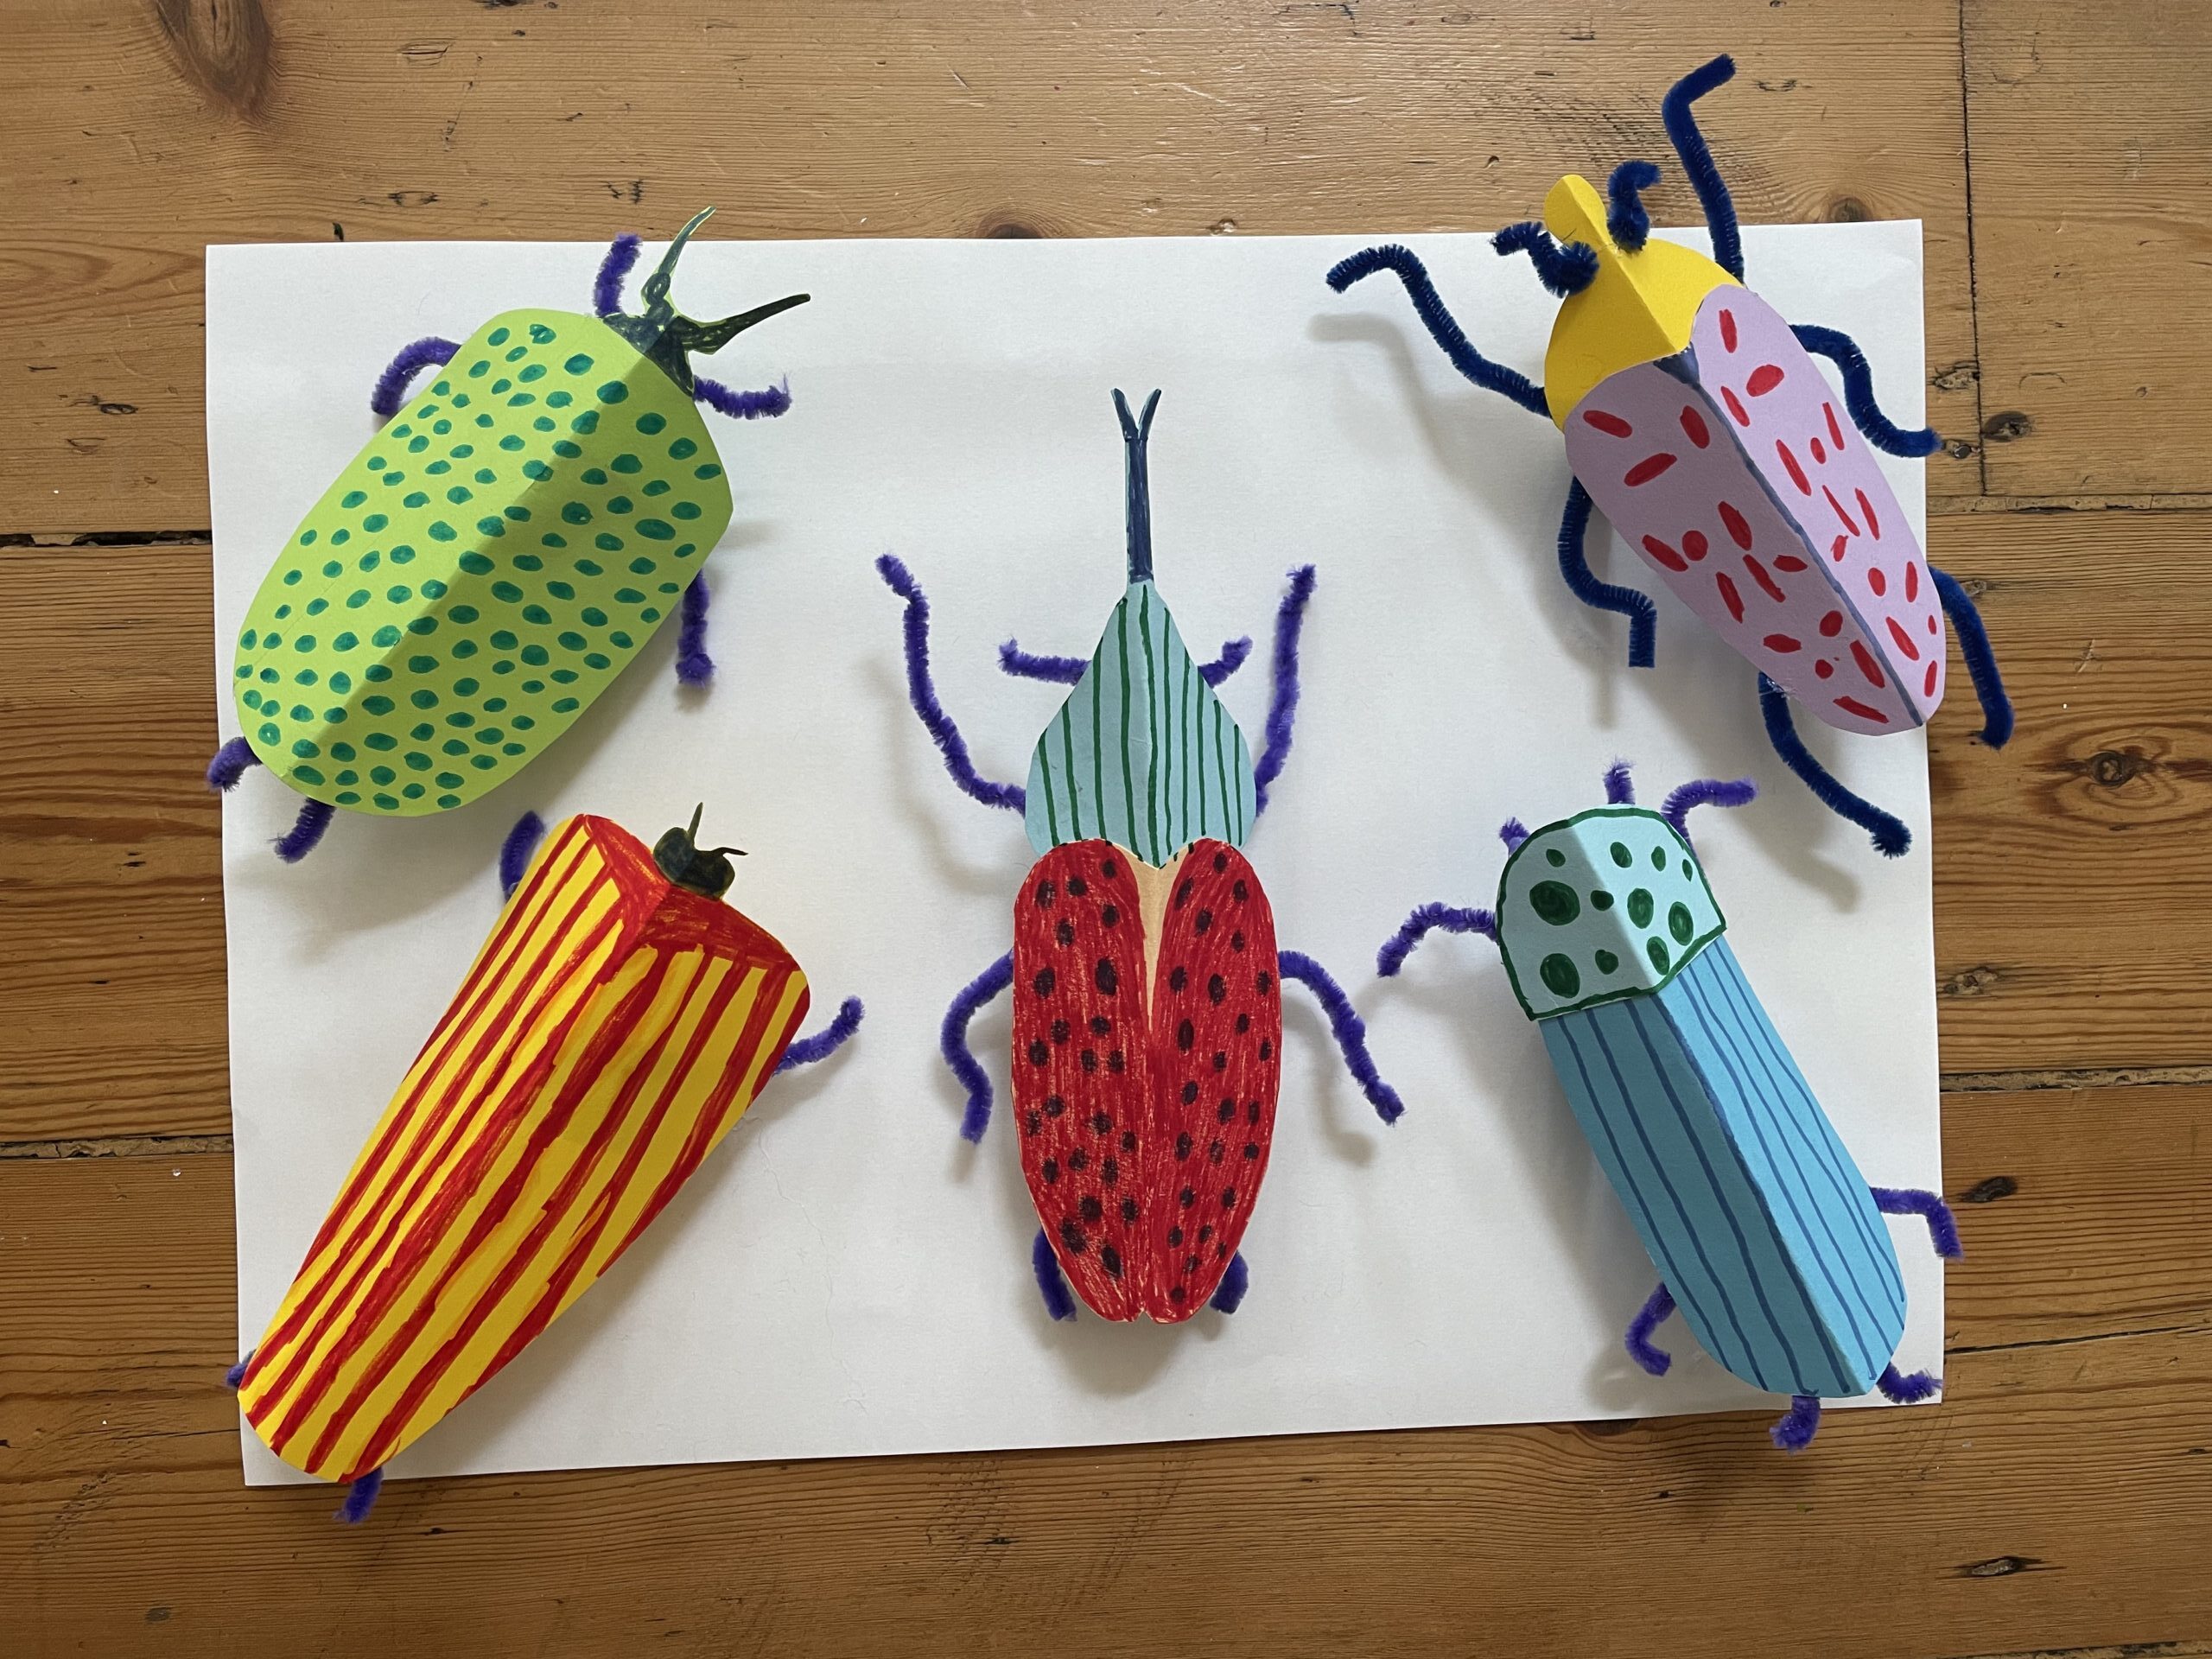 Beetle Art by Celina Wysocka, third place in age 3-7 category, Insect Week 2022 art competition